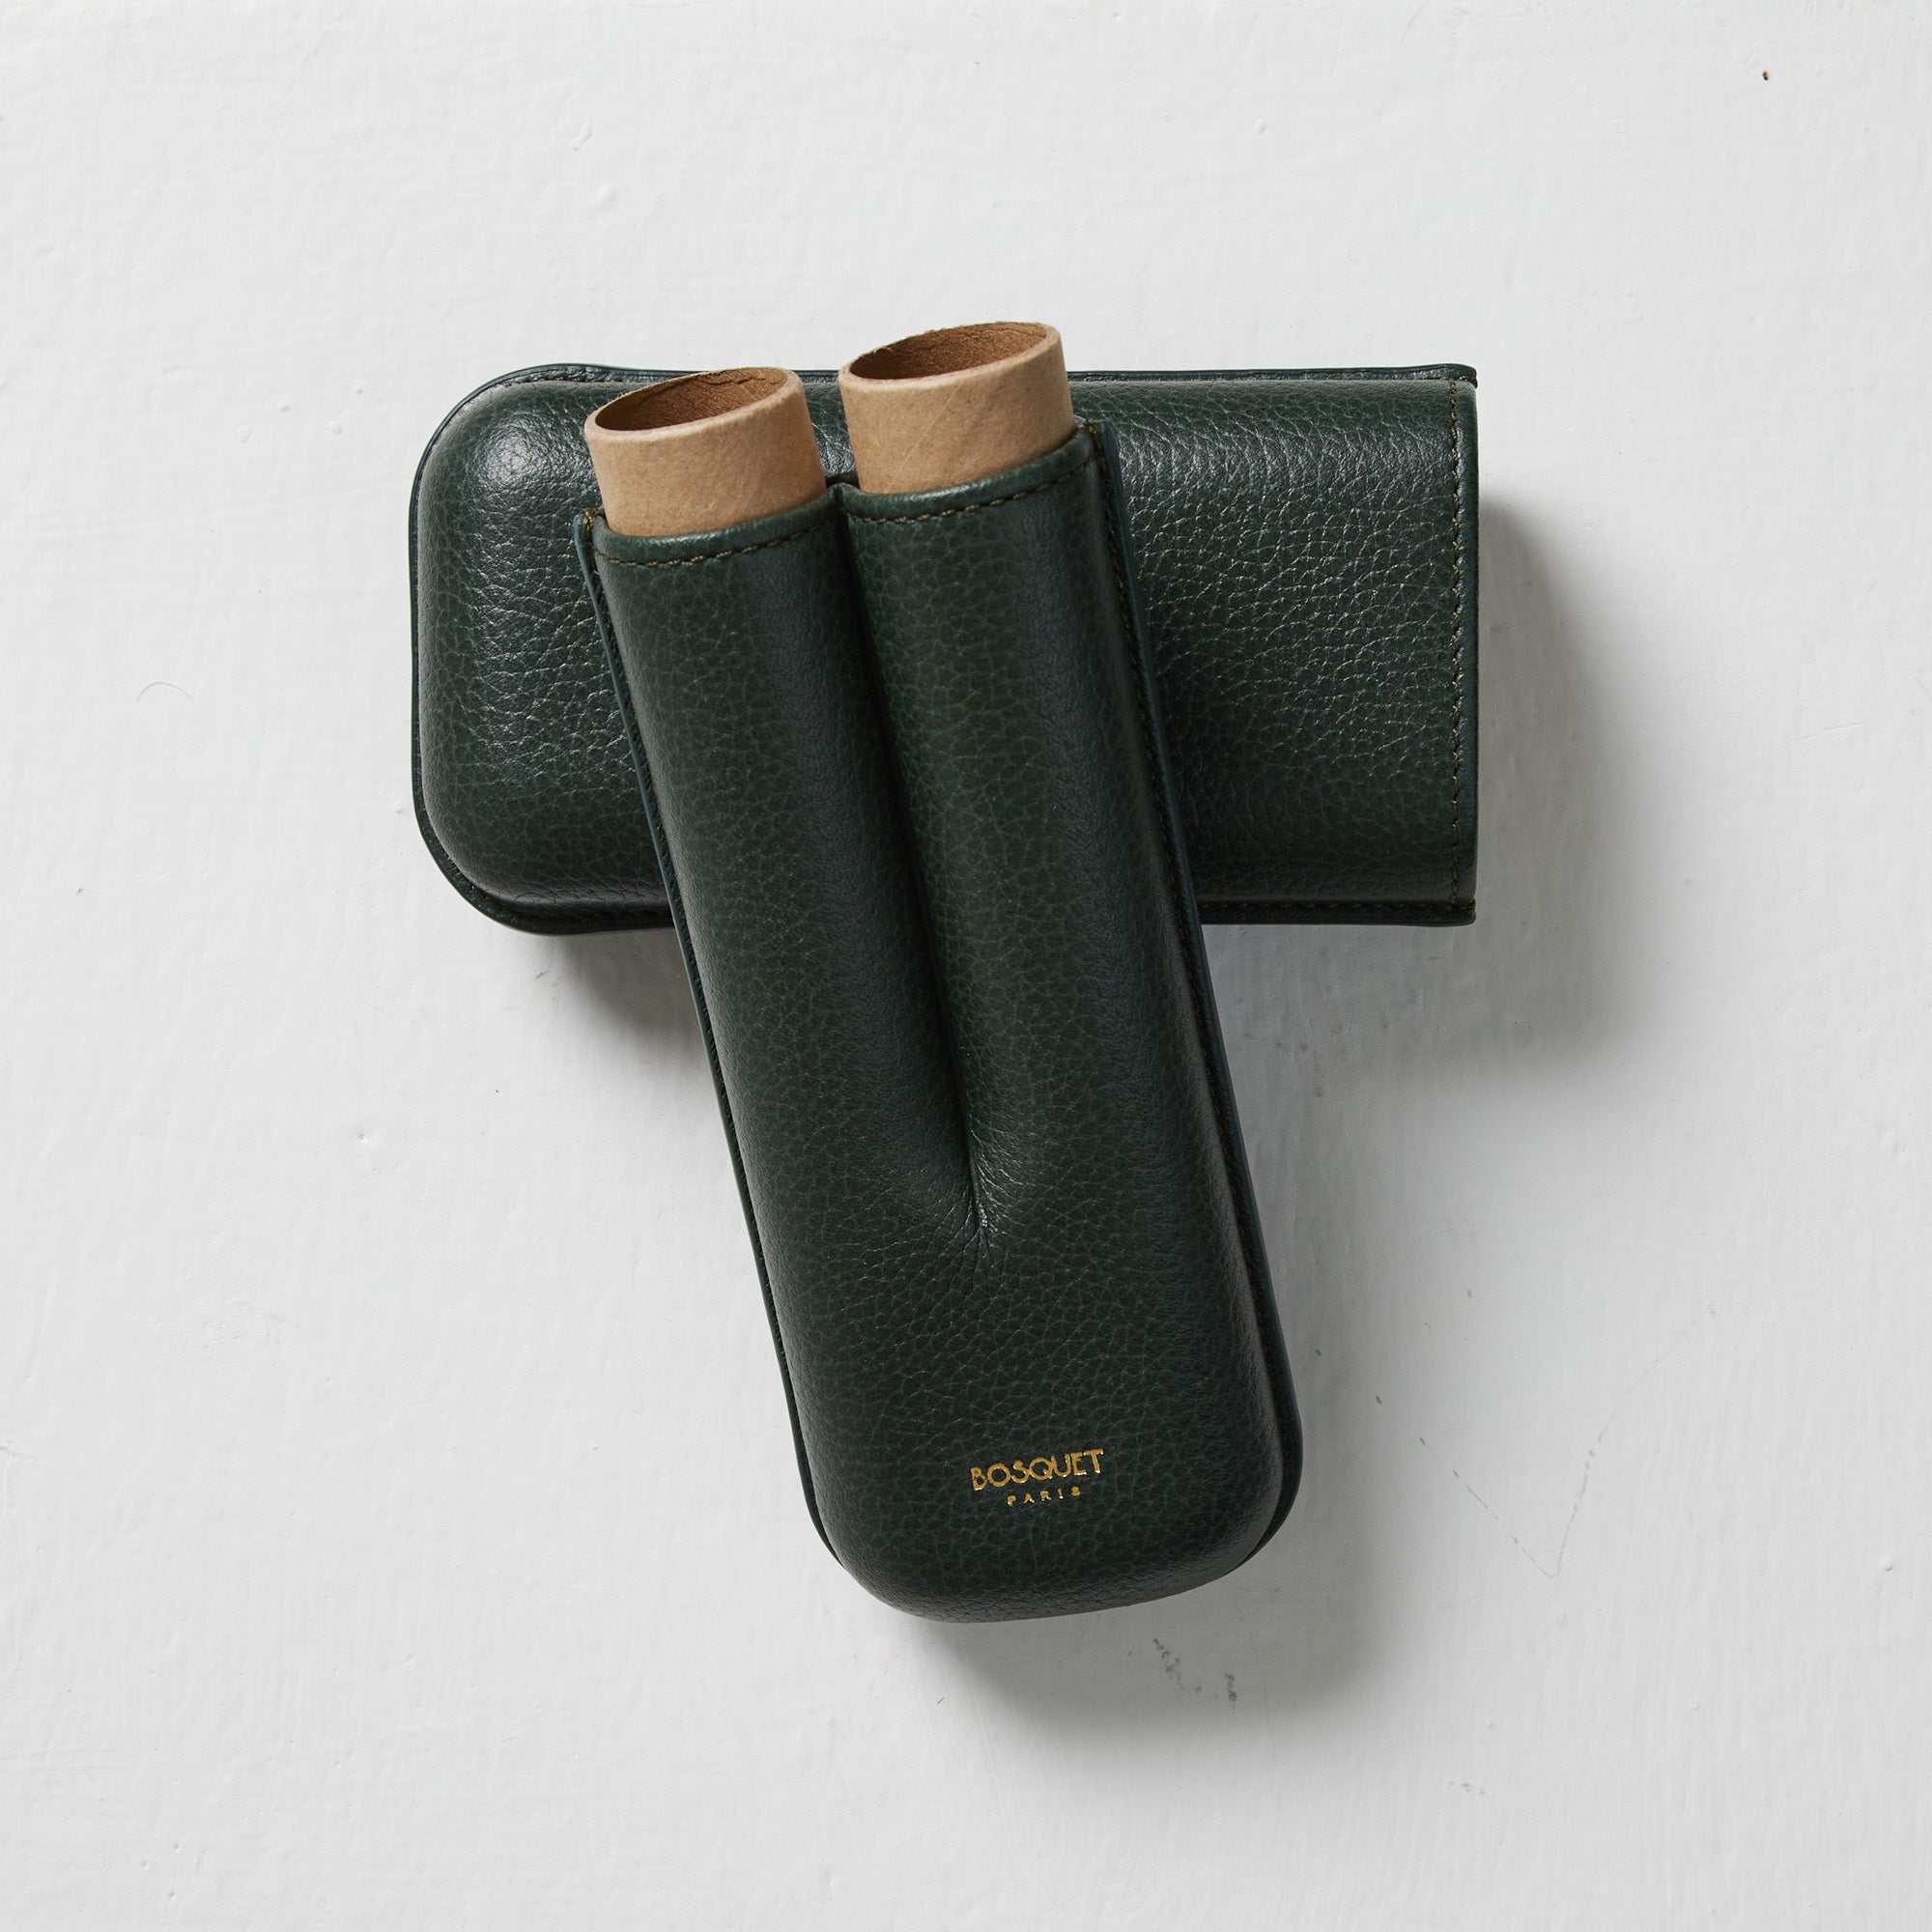 A Bosquet Smooth Forest Green Leather Cigar Case for transporting cigars. (Brand: Bosque)